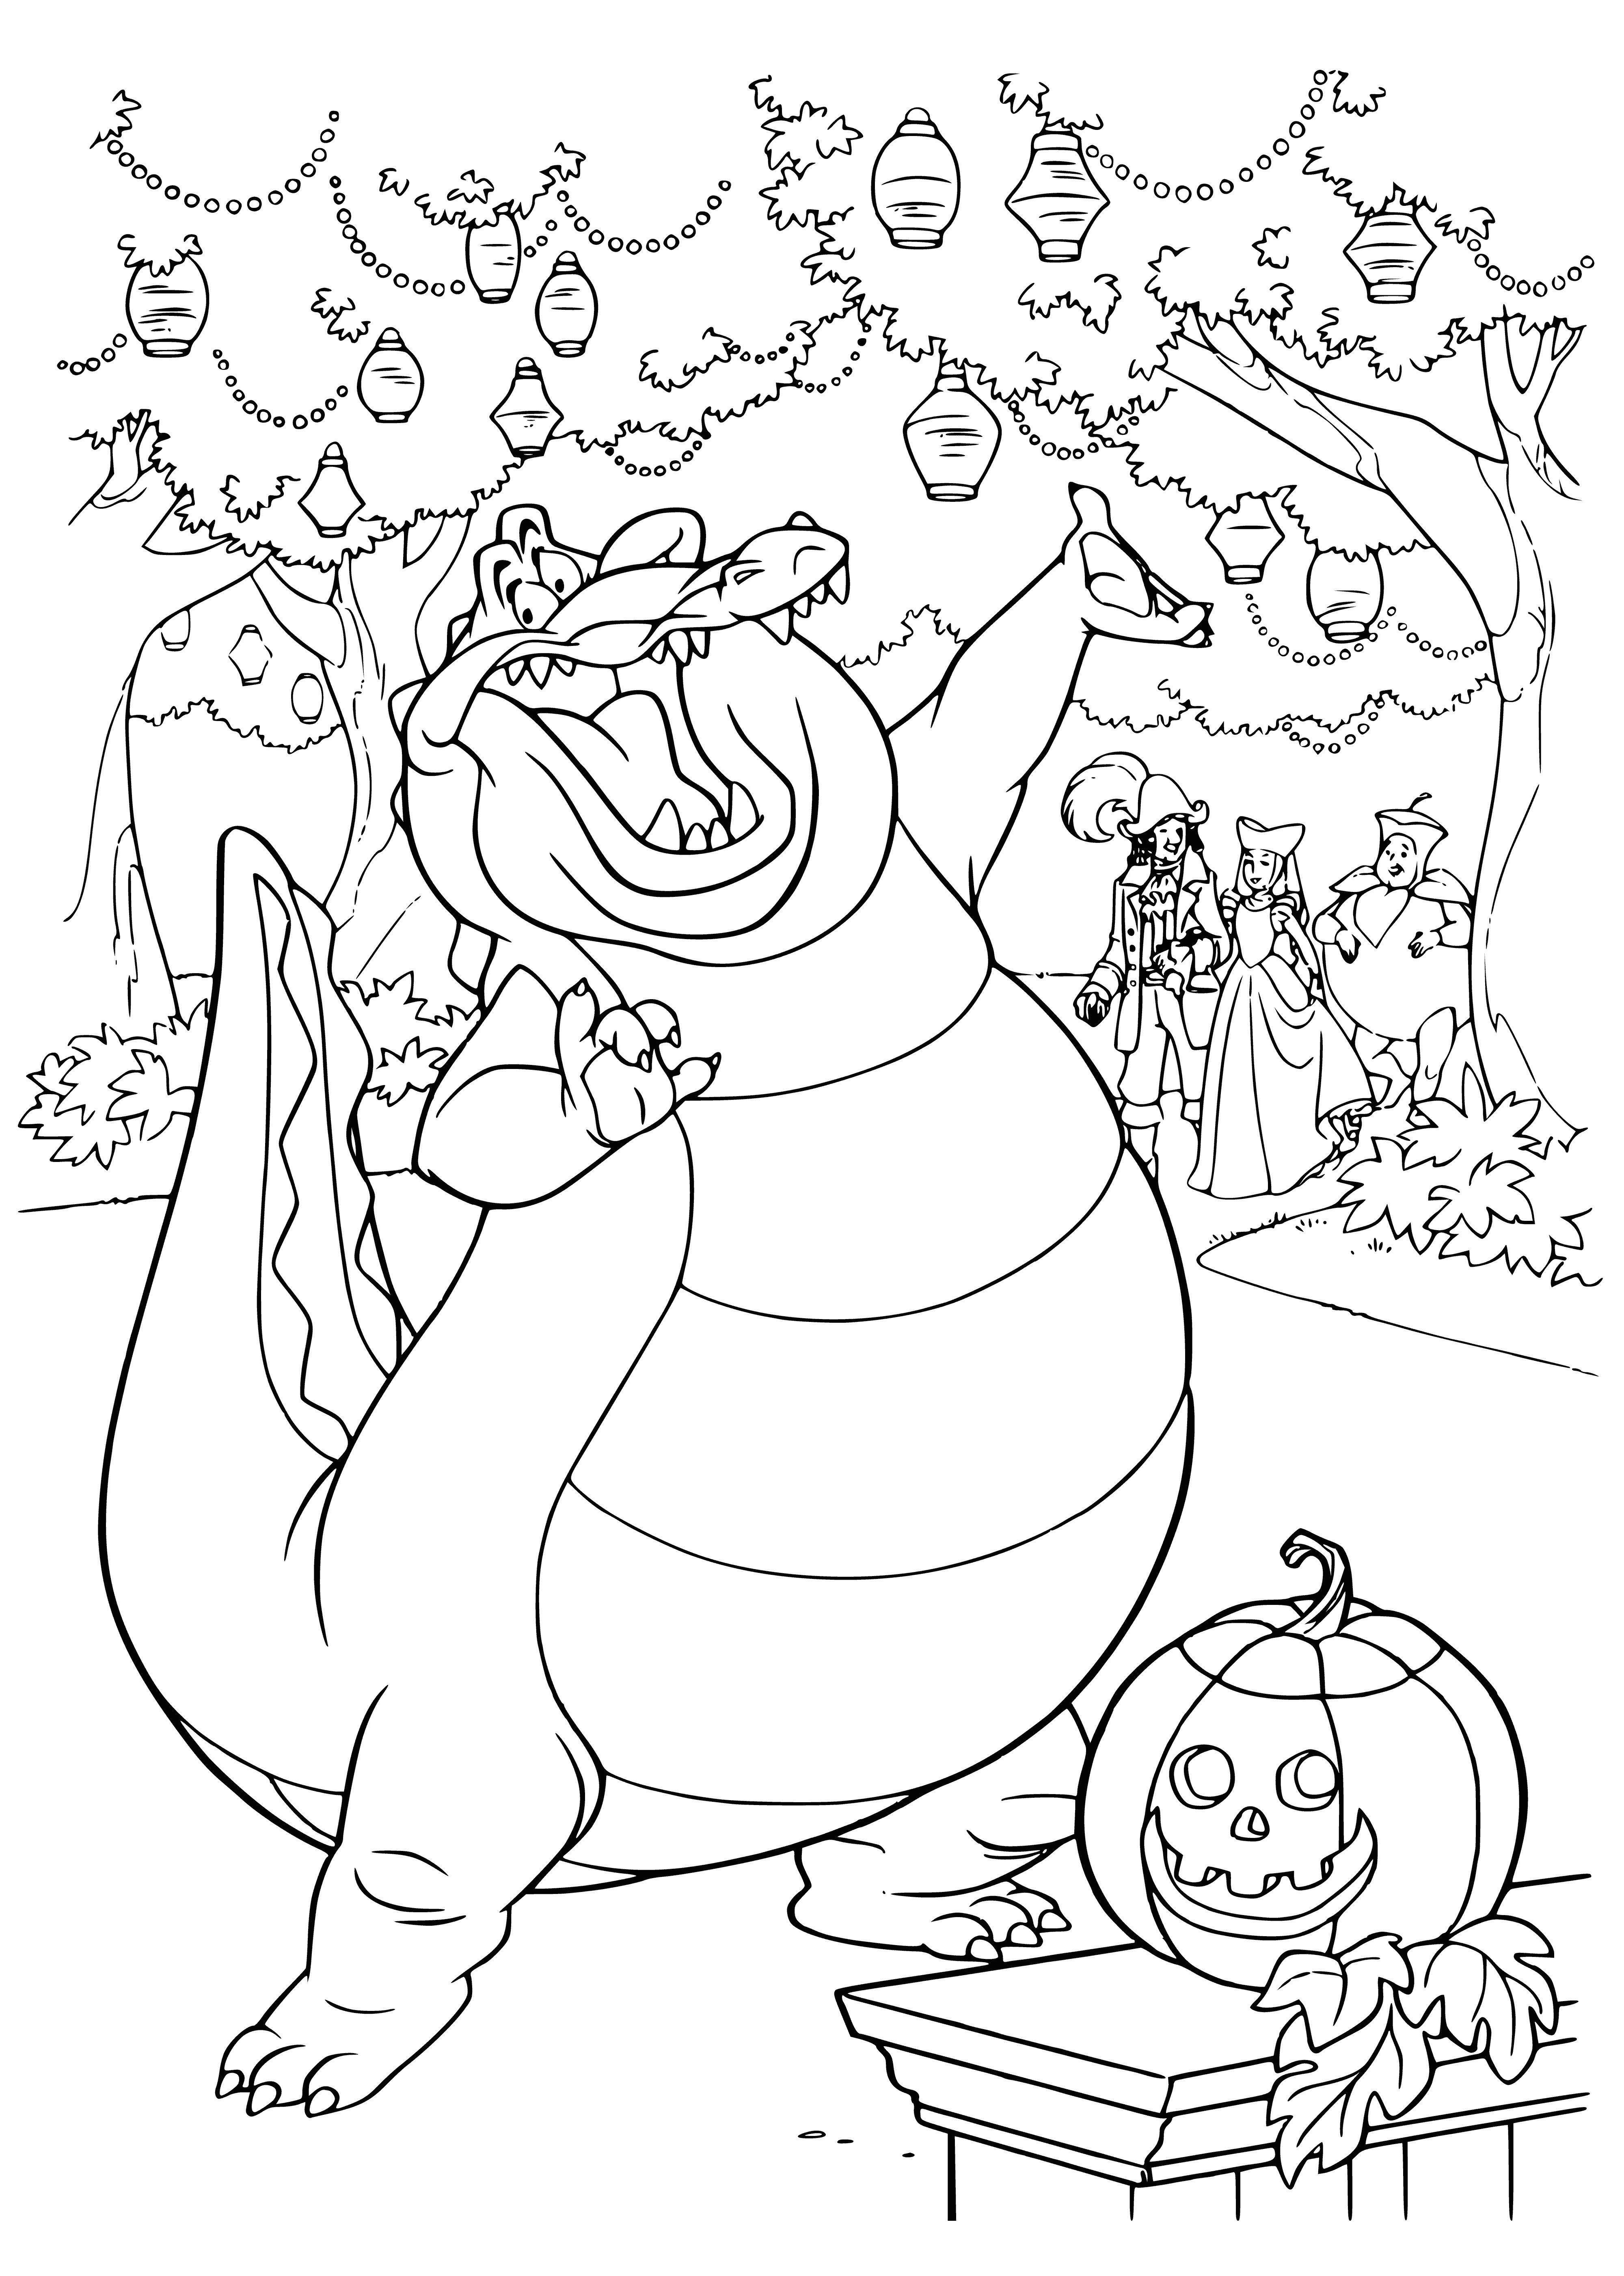 coloring page: At the table sits two people in costume, one a black cat, the other a witch; there's pumpkins, candy & a spider decoration. #Halloween